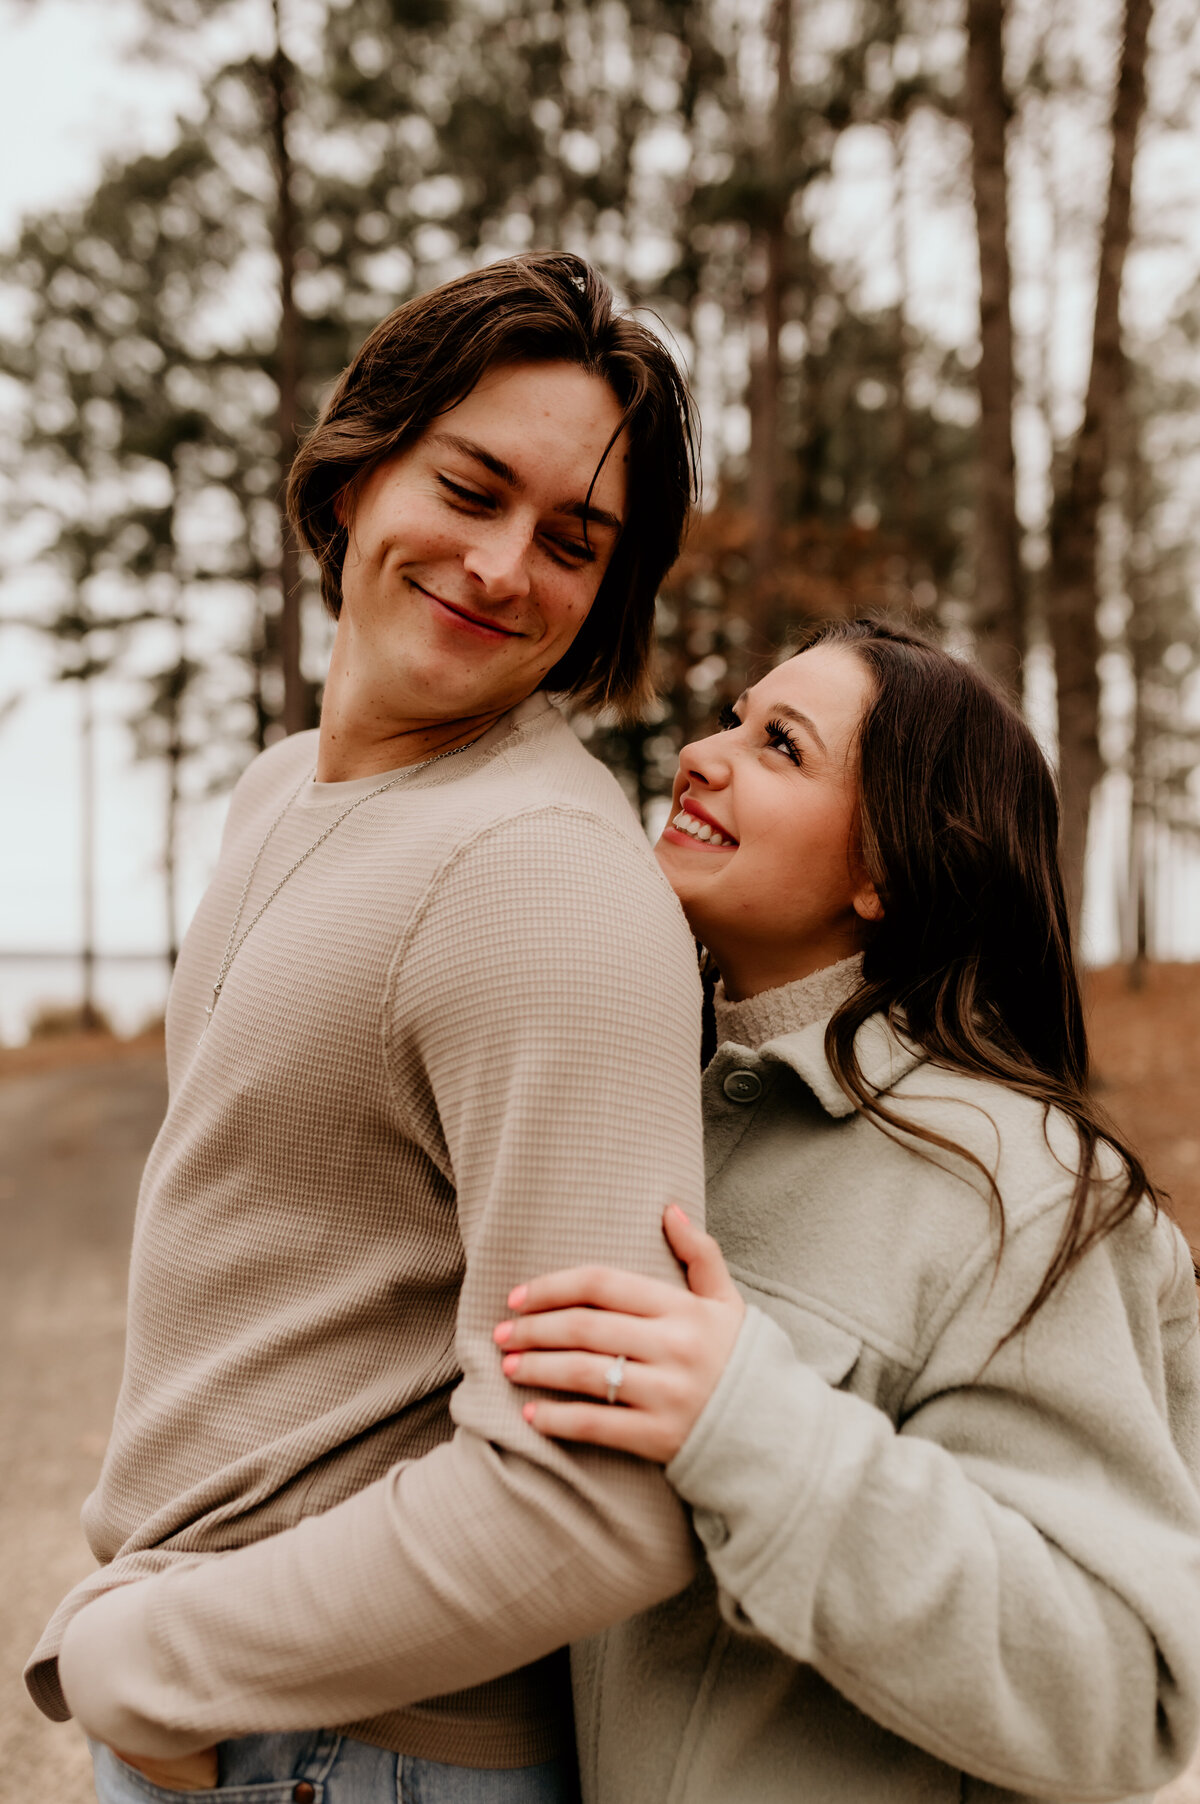 Little rock engagement photographer goes to an adventure session with an engaged couple as the man looks back at the woman and smiles at her as she holds his arm and smiles up at him